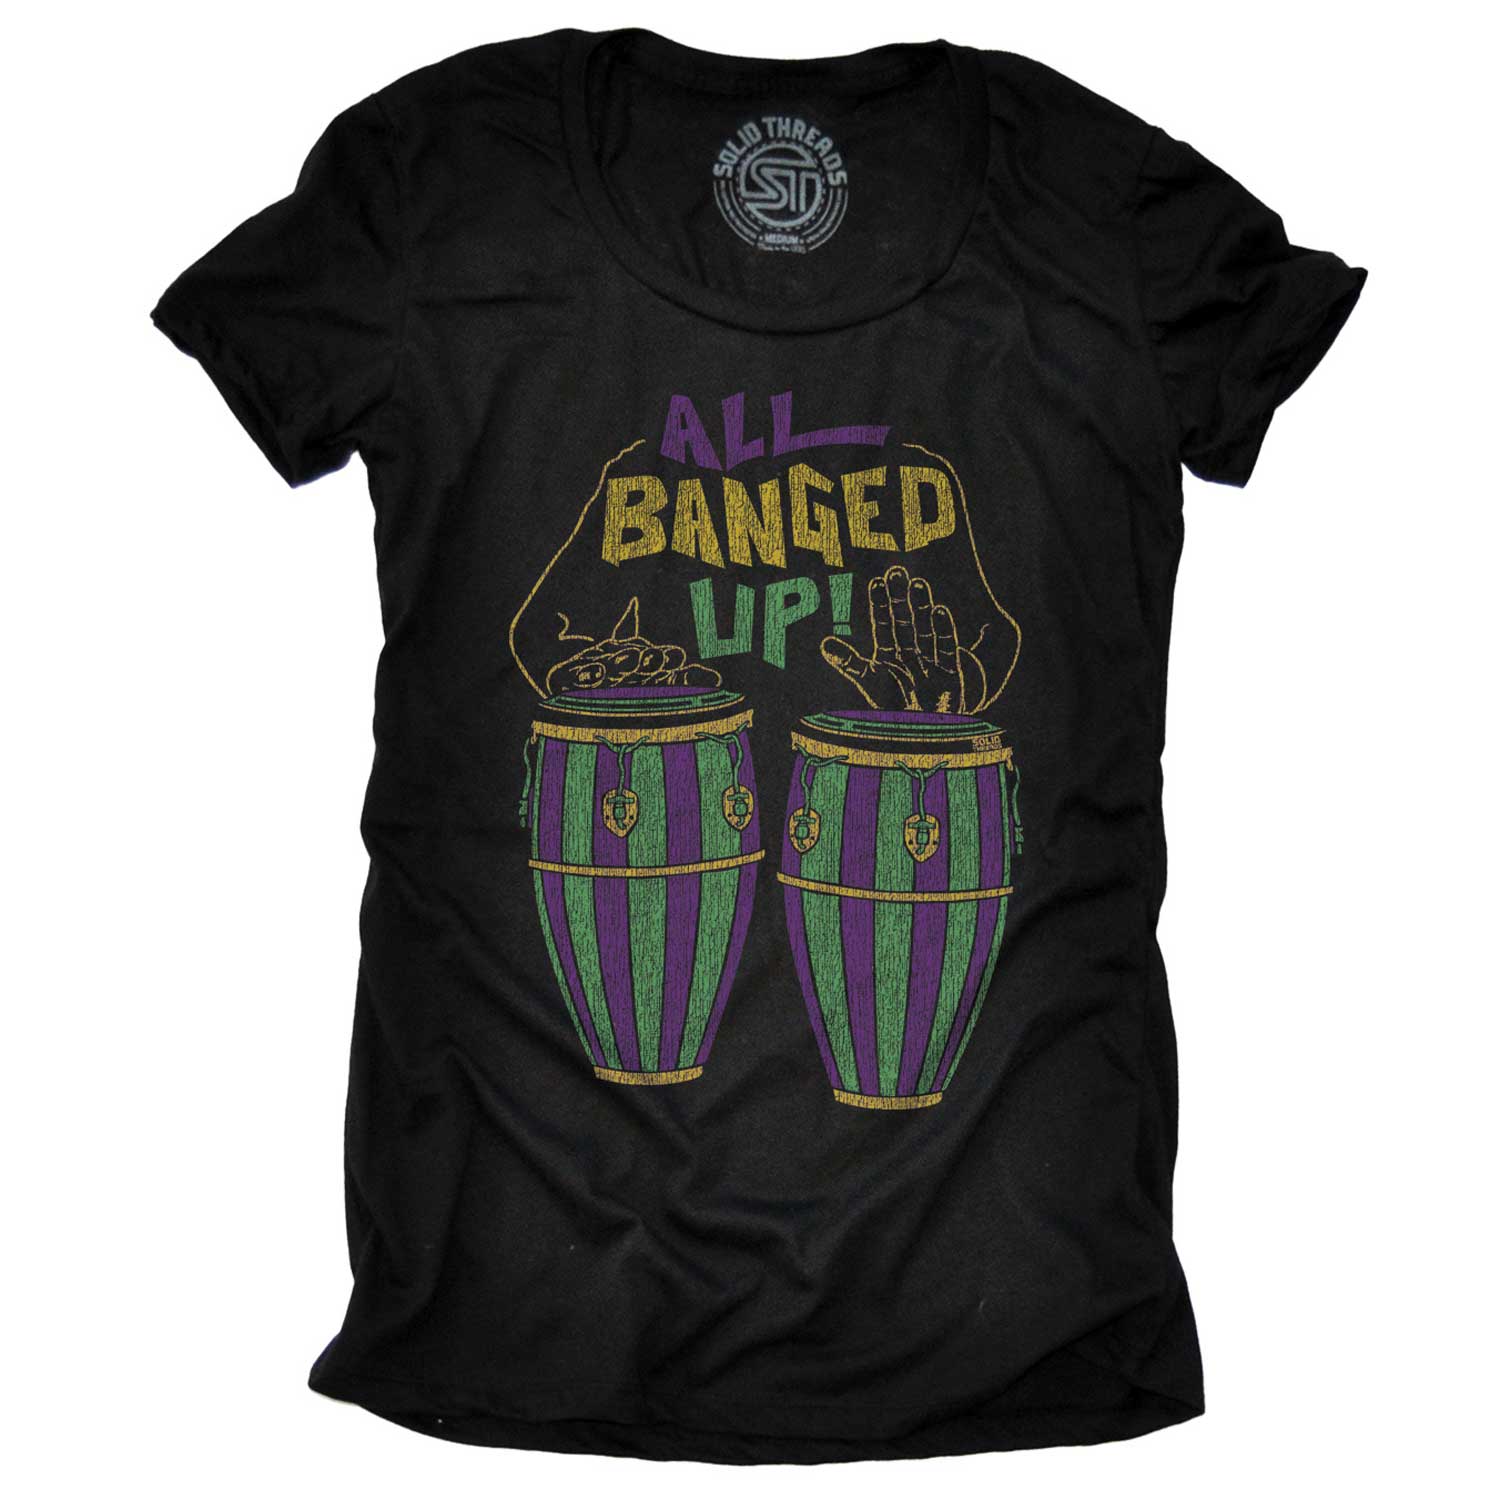 Women's All Banged Up Vintage Graphic T-Shirt | Funny New Orleans Music Black Tee | Solid Threads